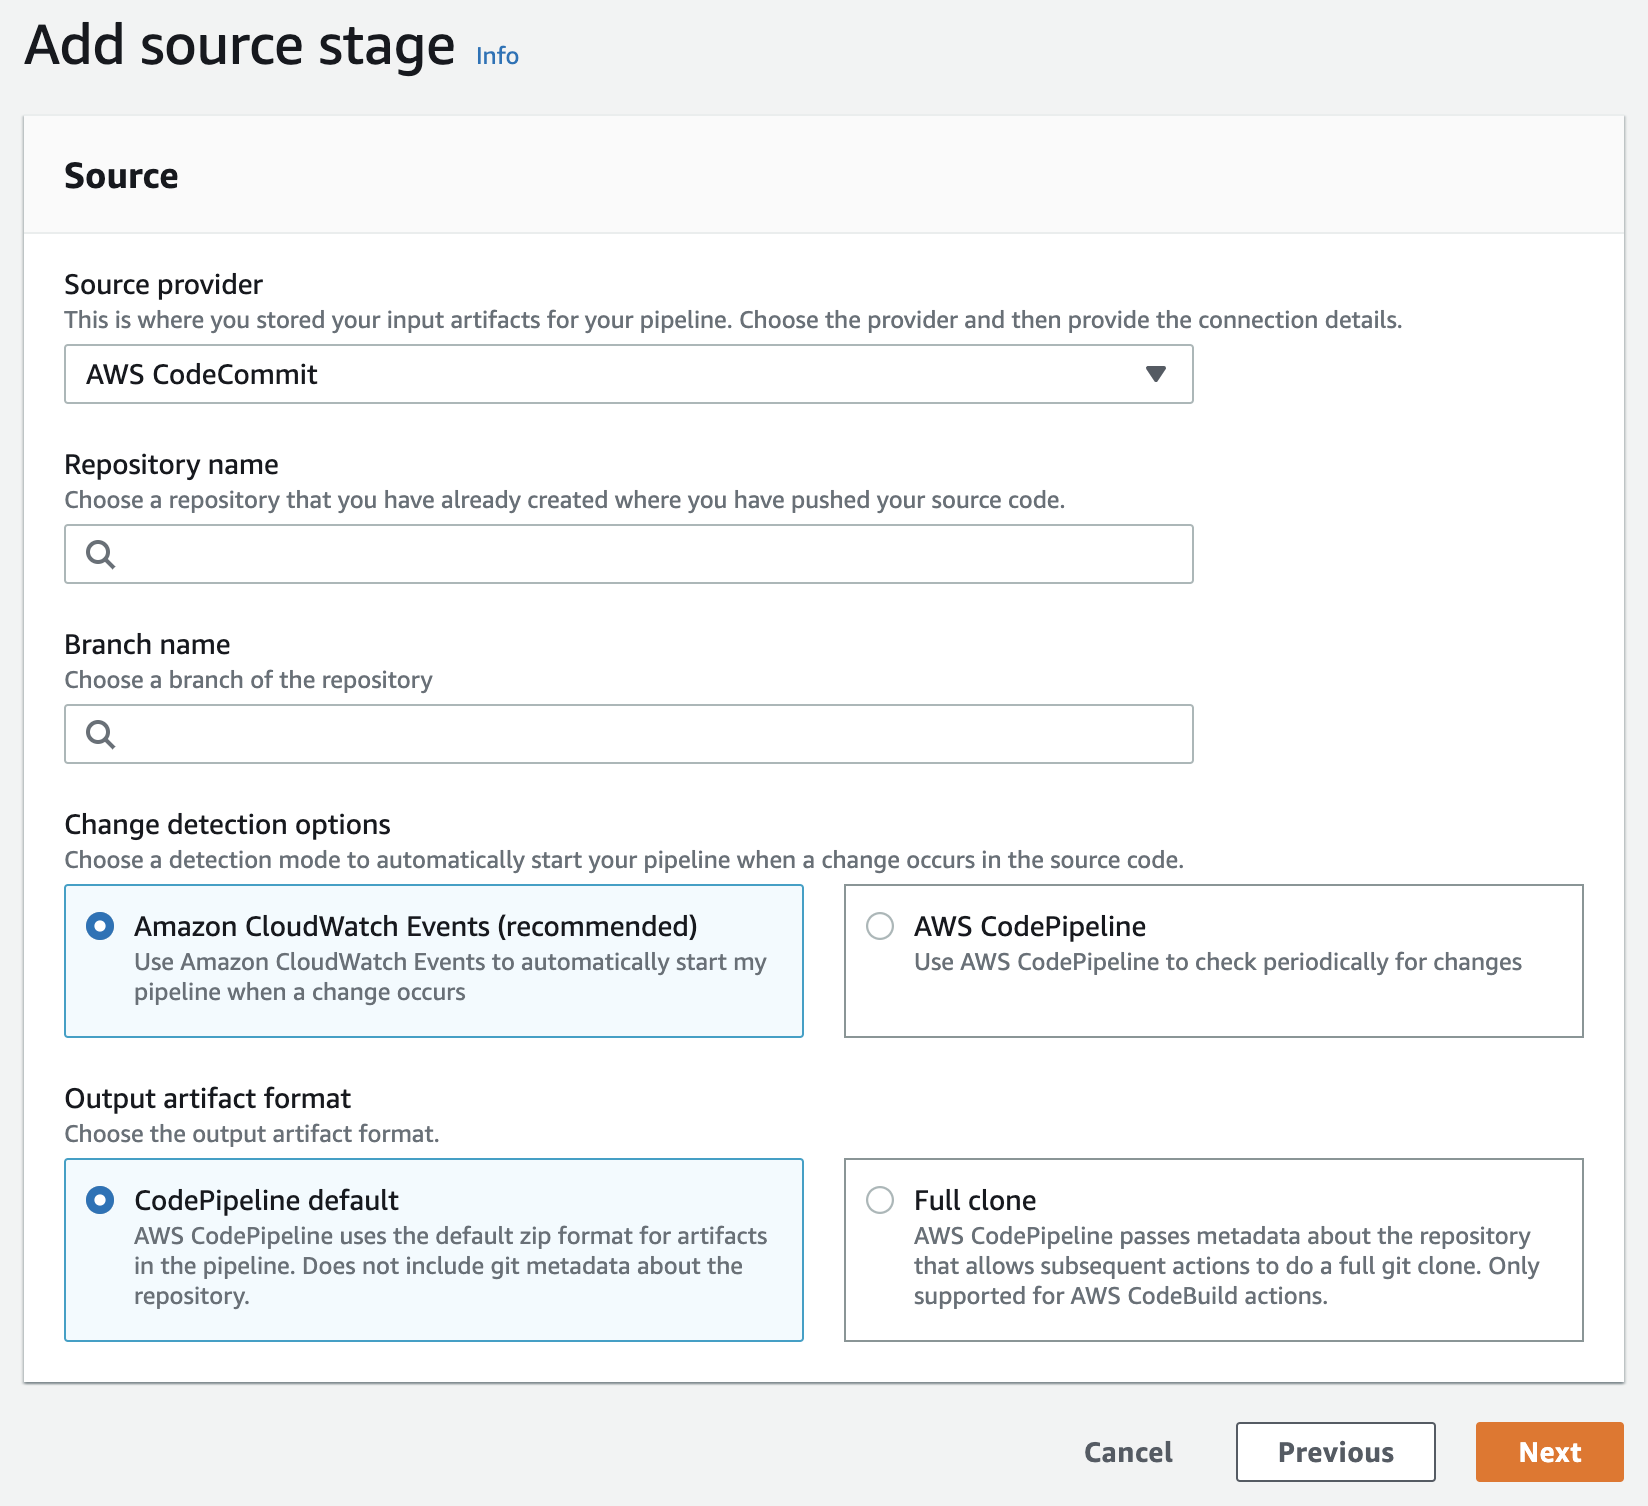 Add source stage wizard